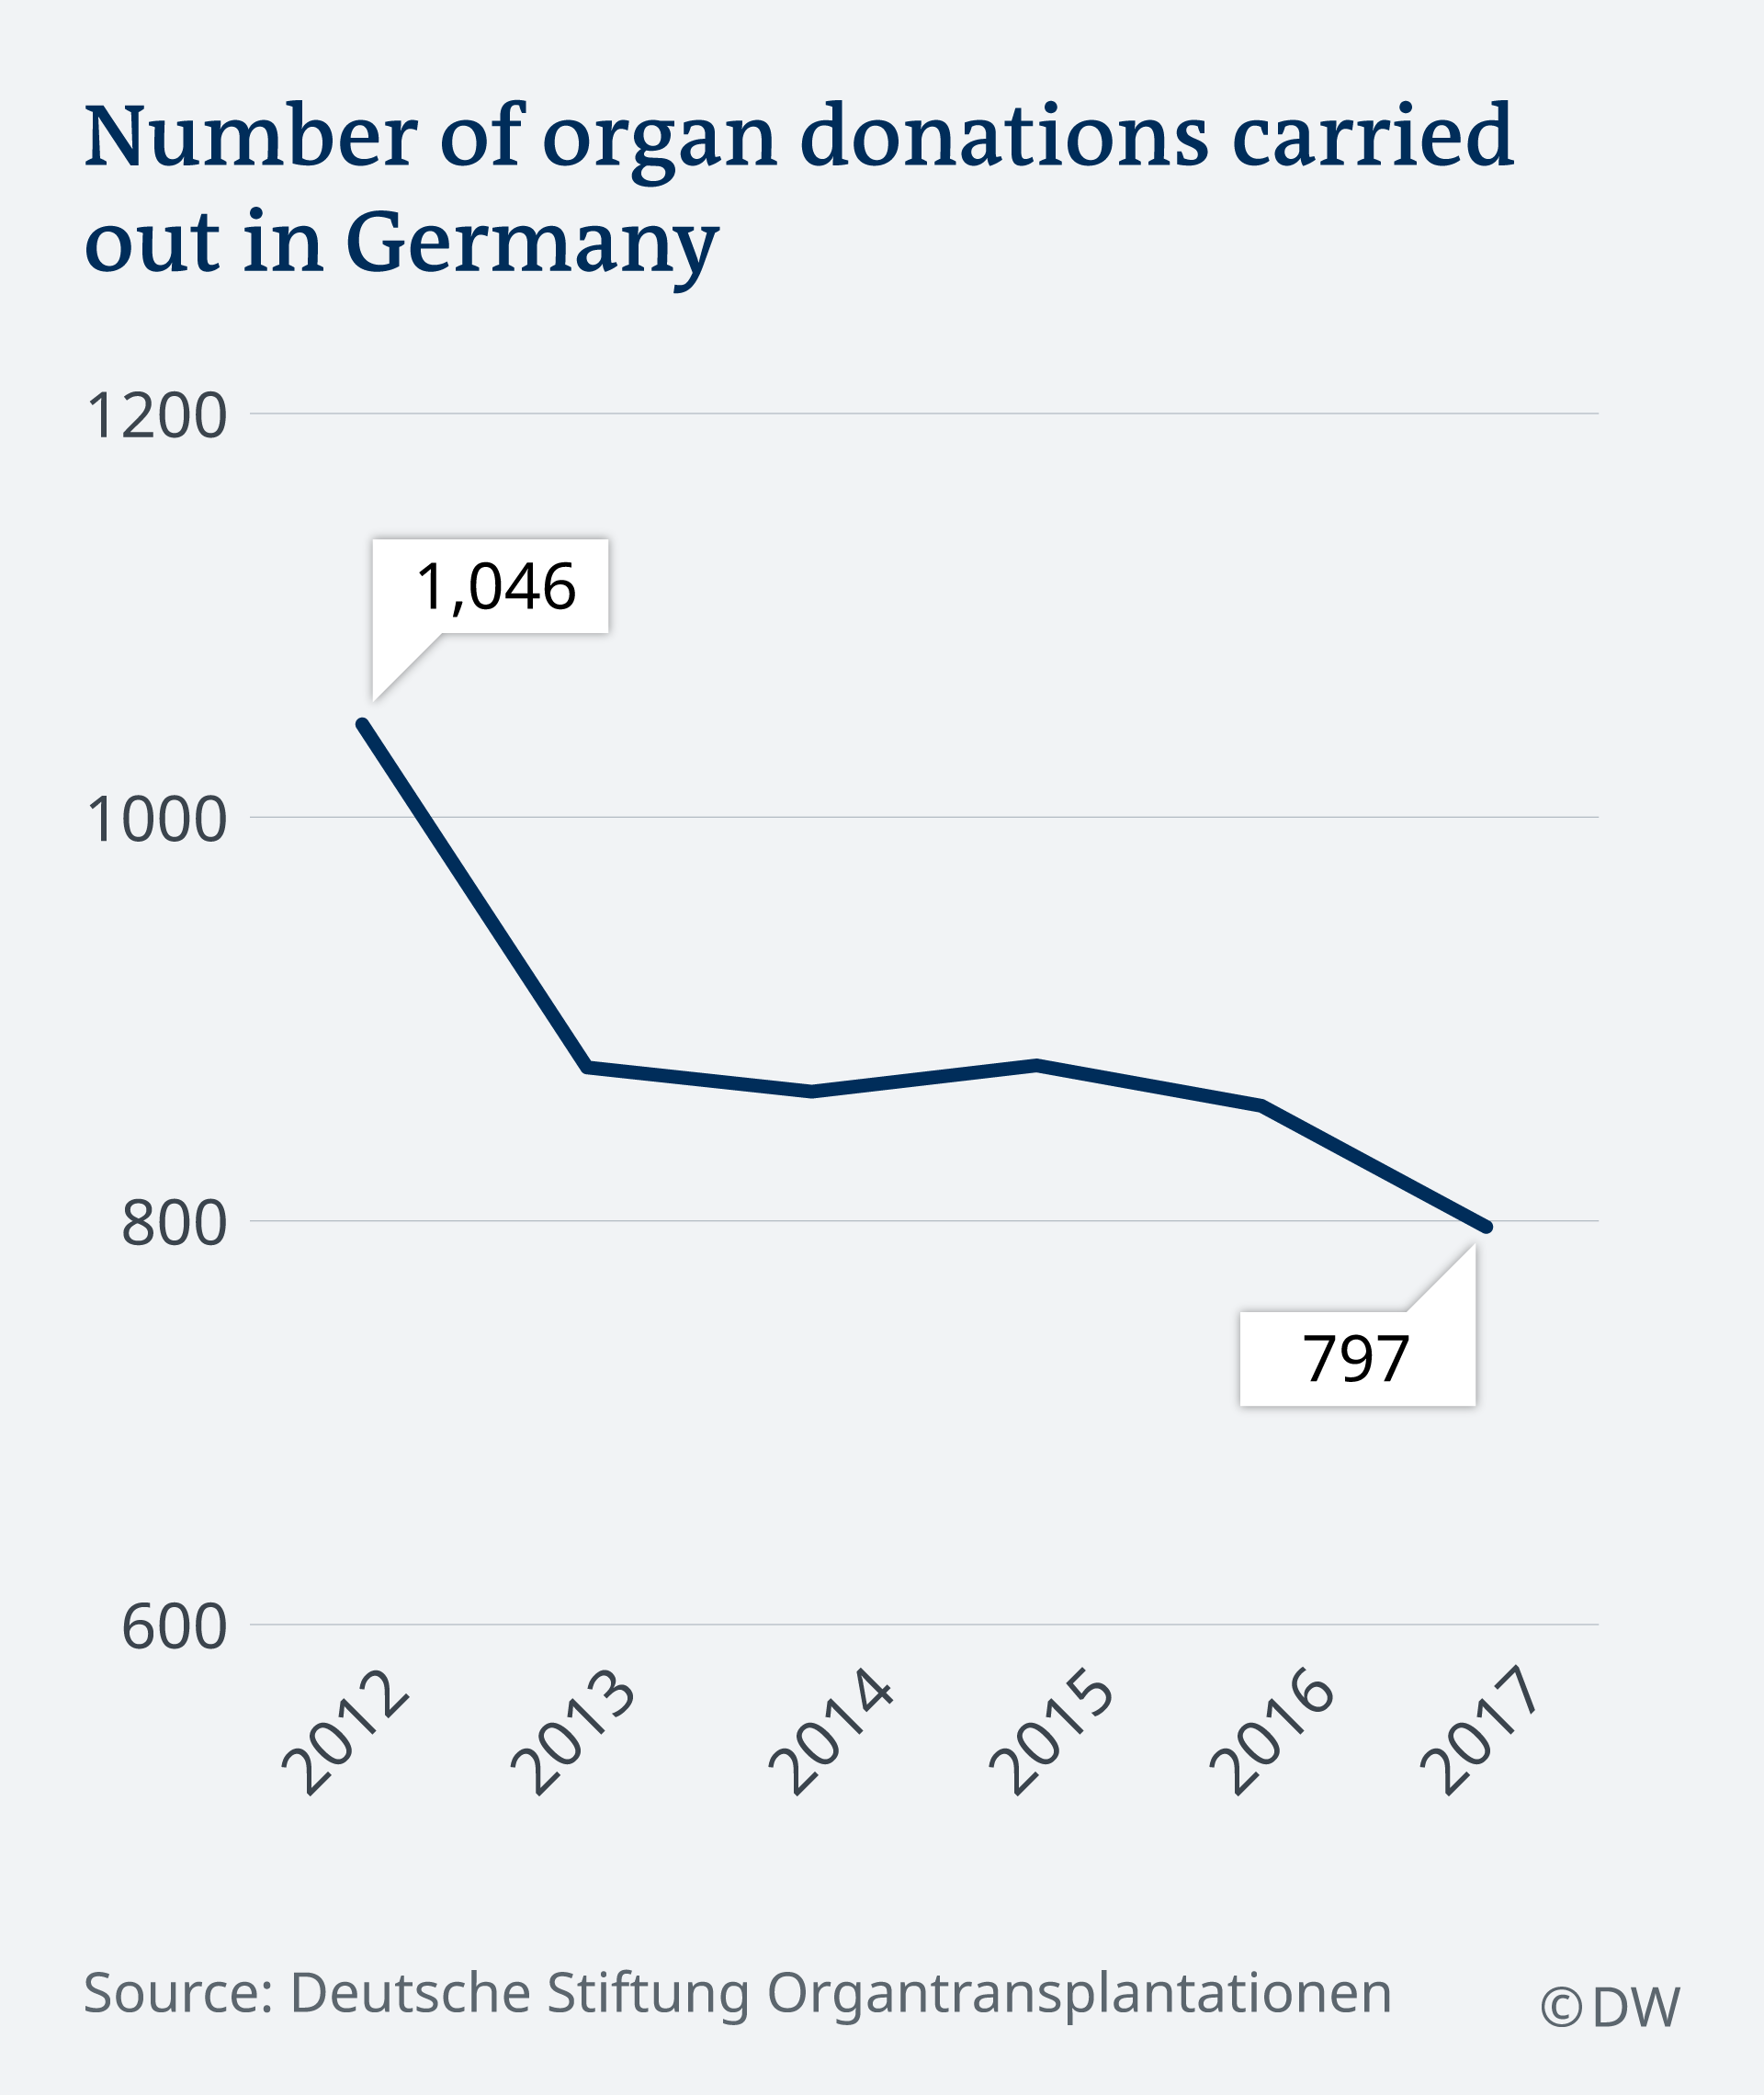 Number of organ donations carried out in Germany